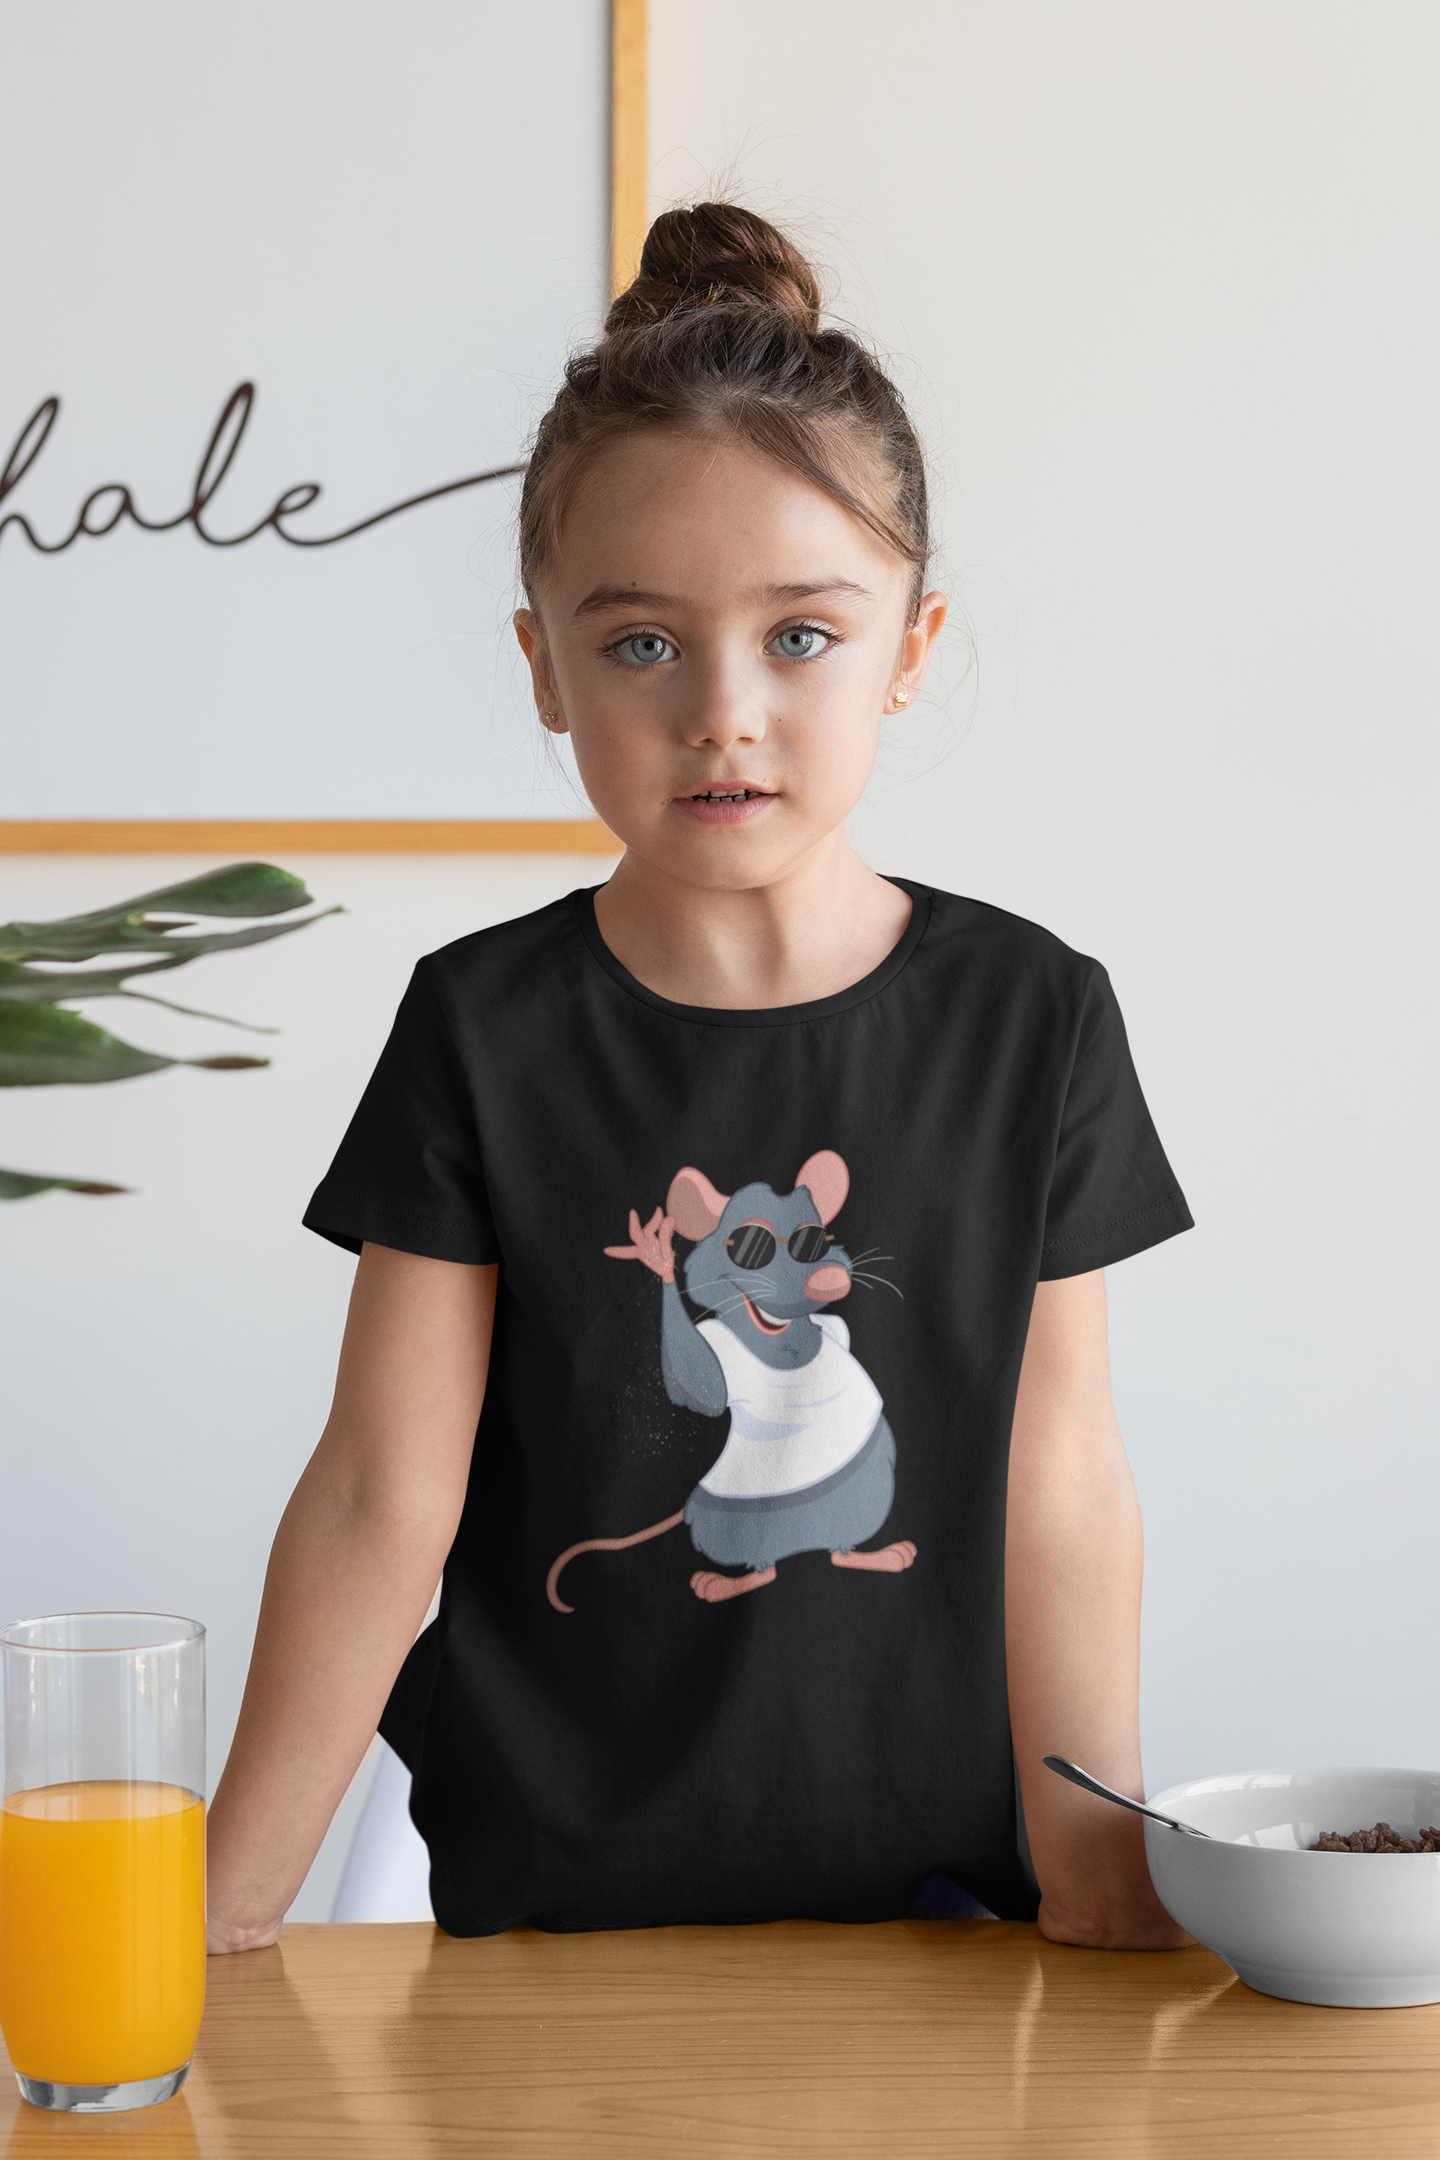 RATBAE - Remy as SaltBae Youth T-Shirt